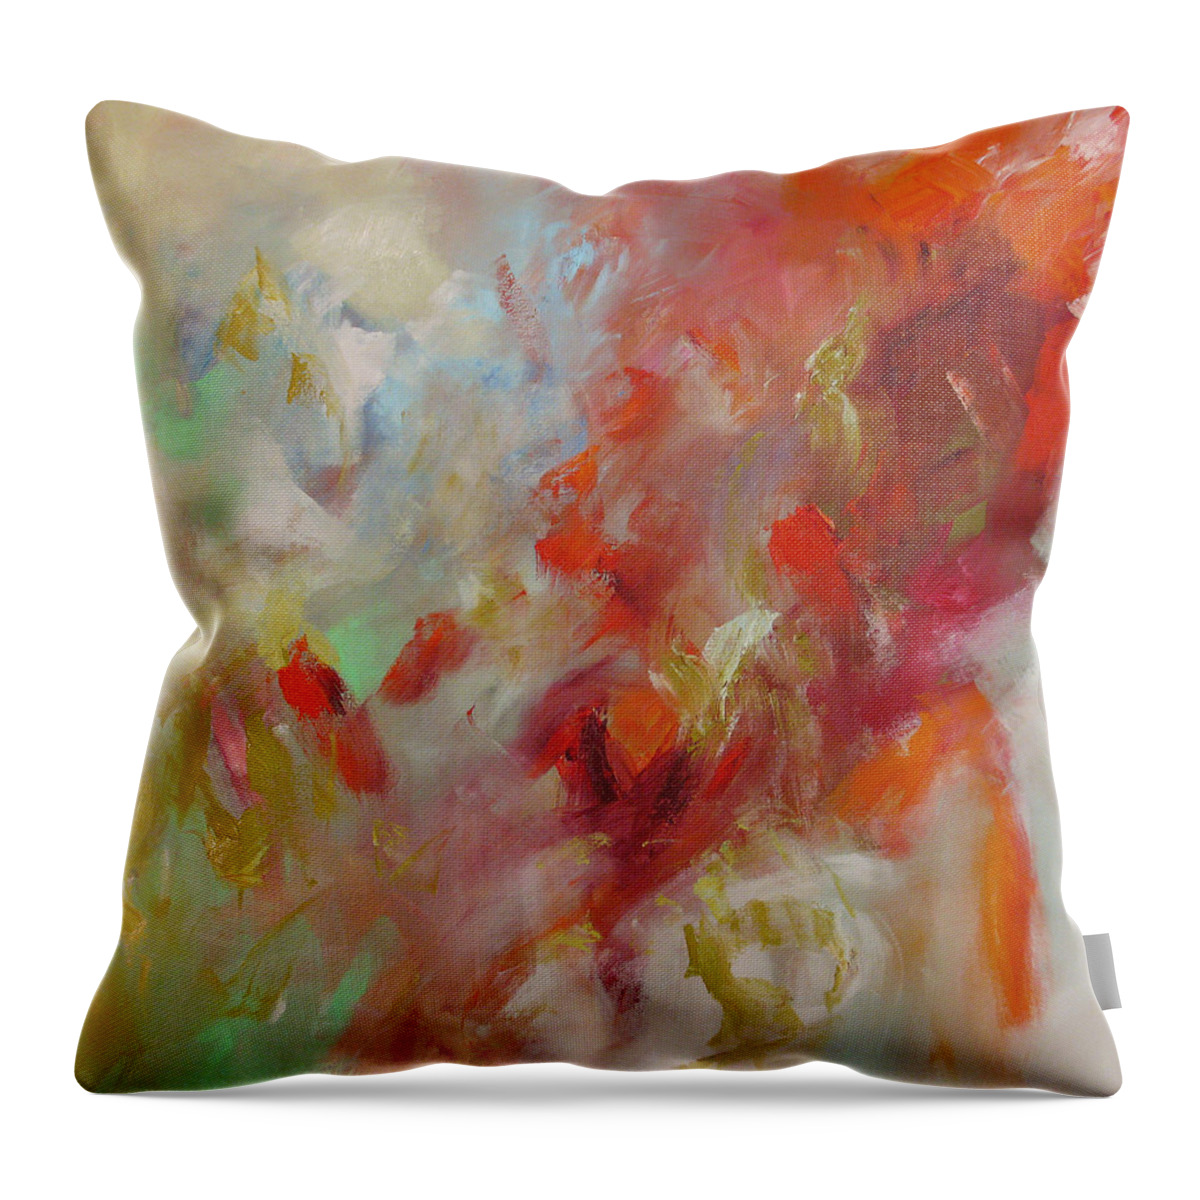 Art Throw Pillow featuring the painting Triumph by Linda Monfort